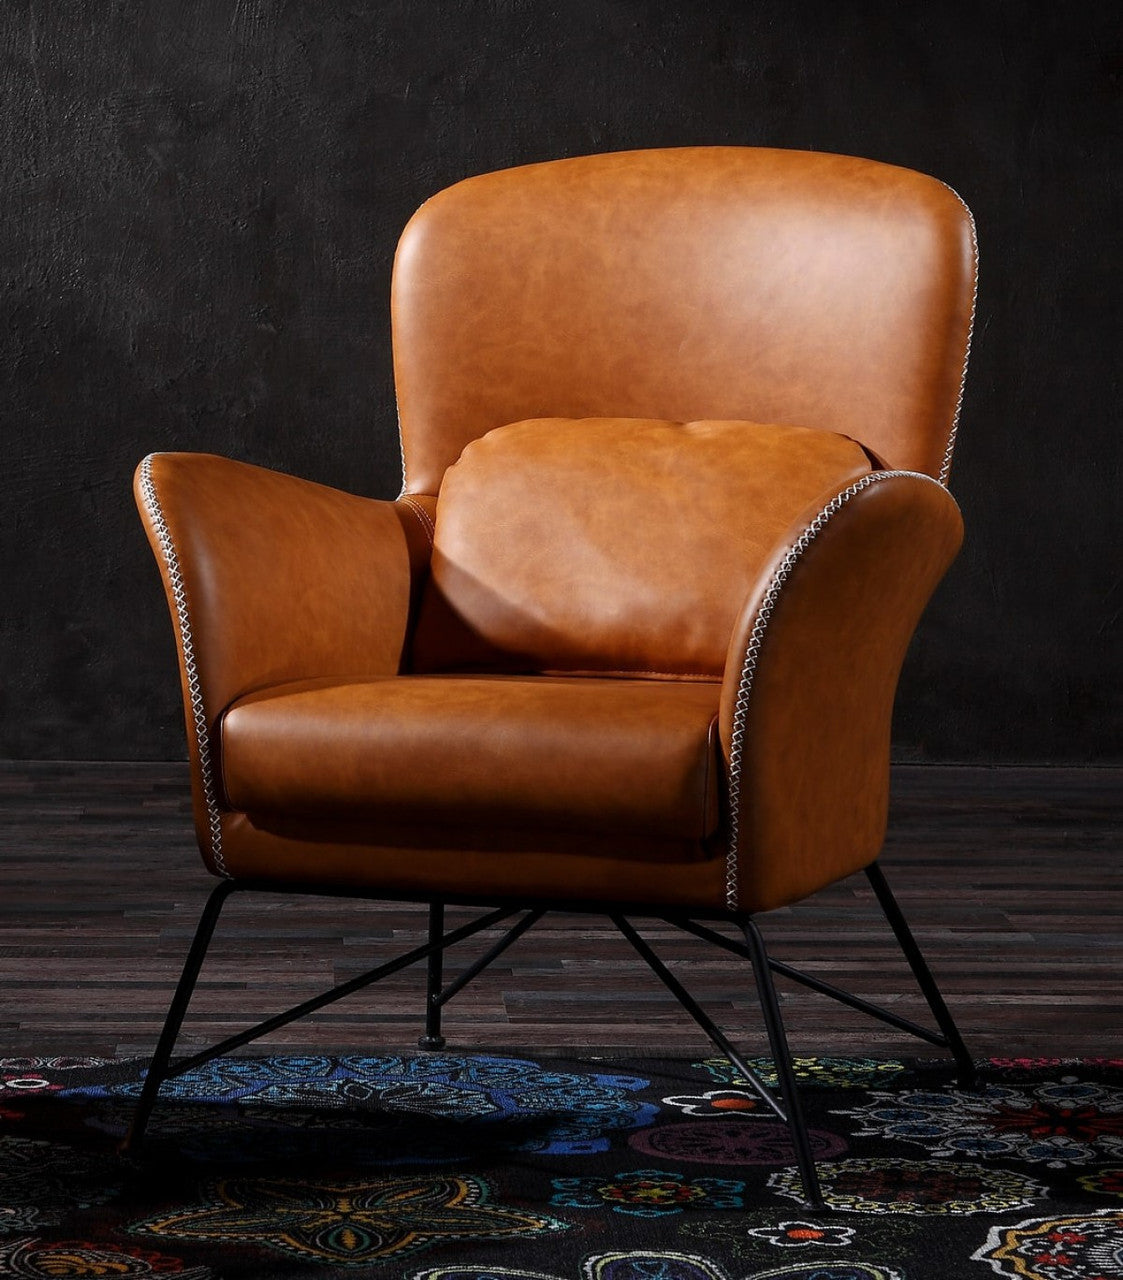 Modrest Kirk Modern Brown Eco-Leather Accent Chair